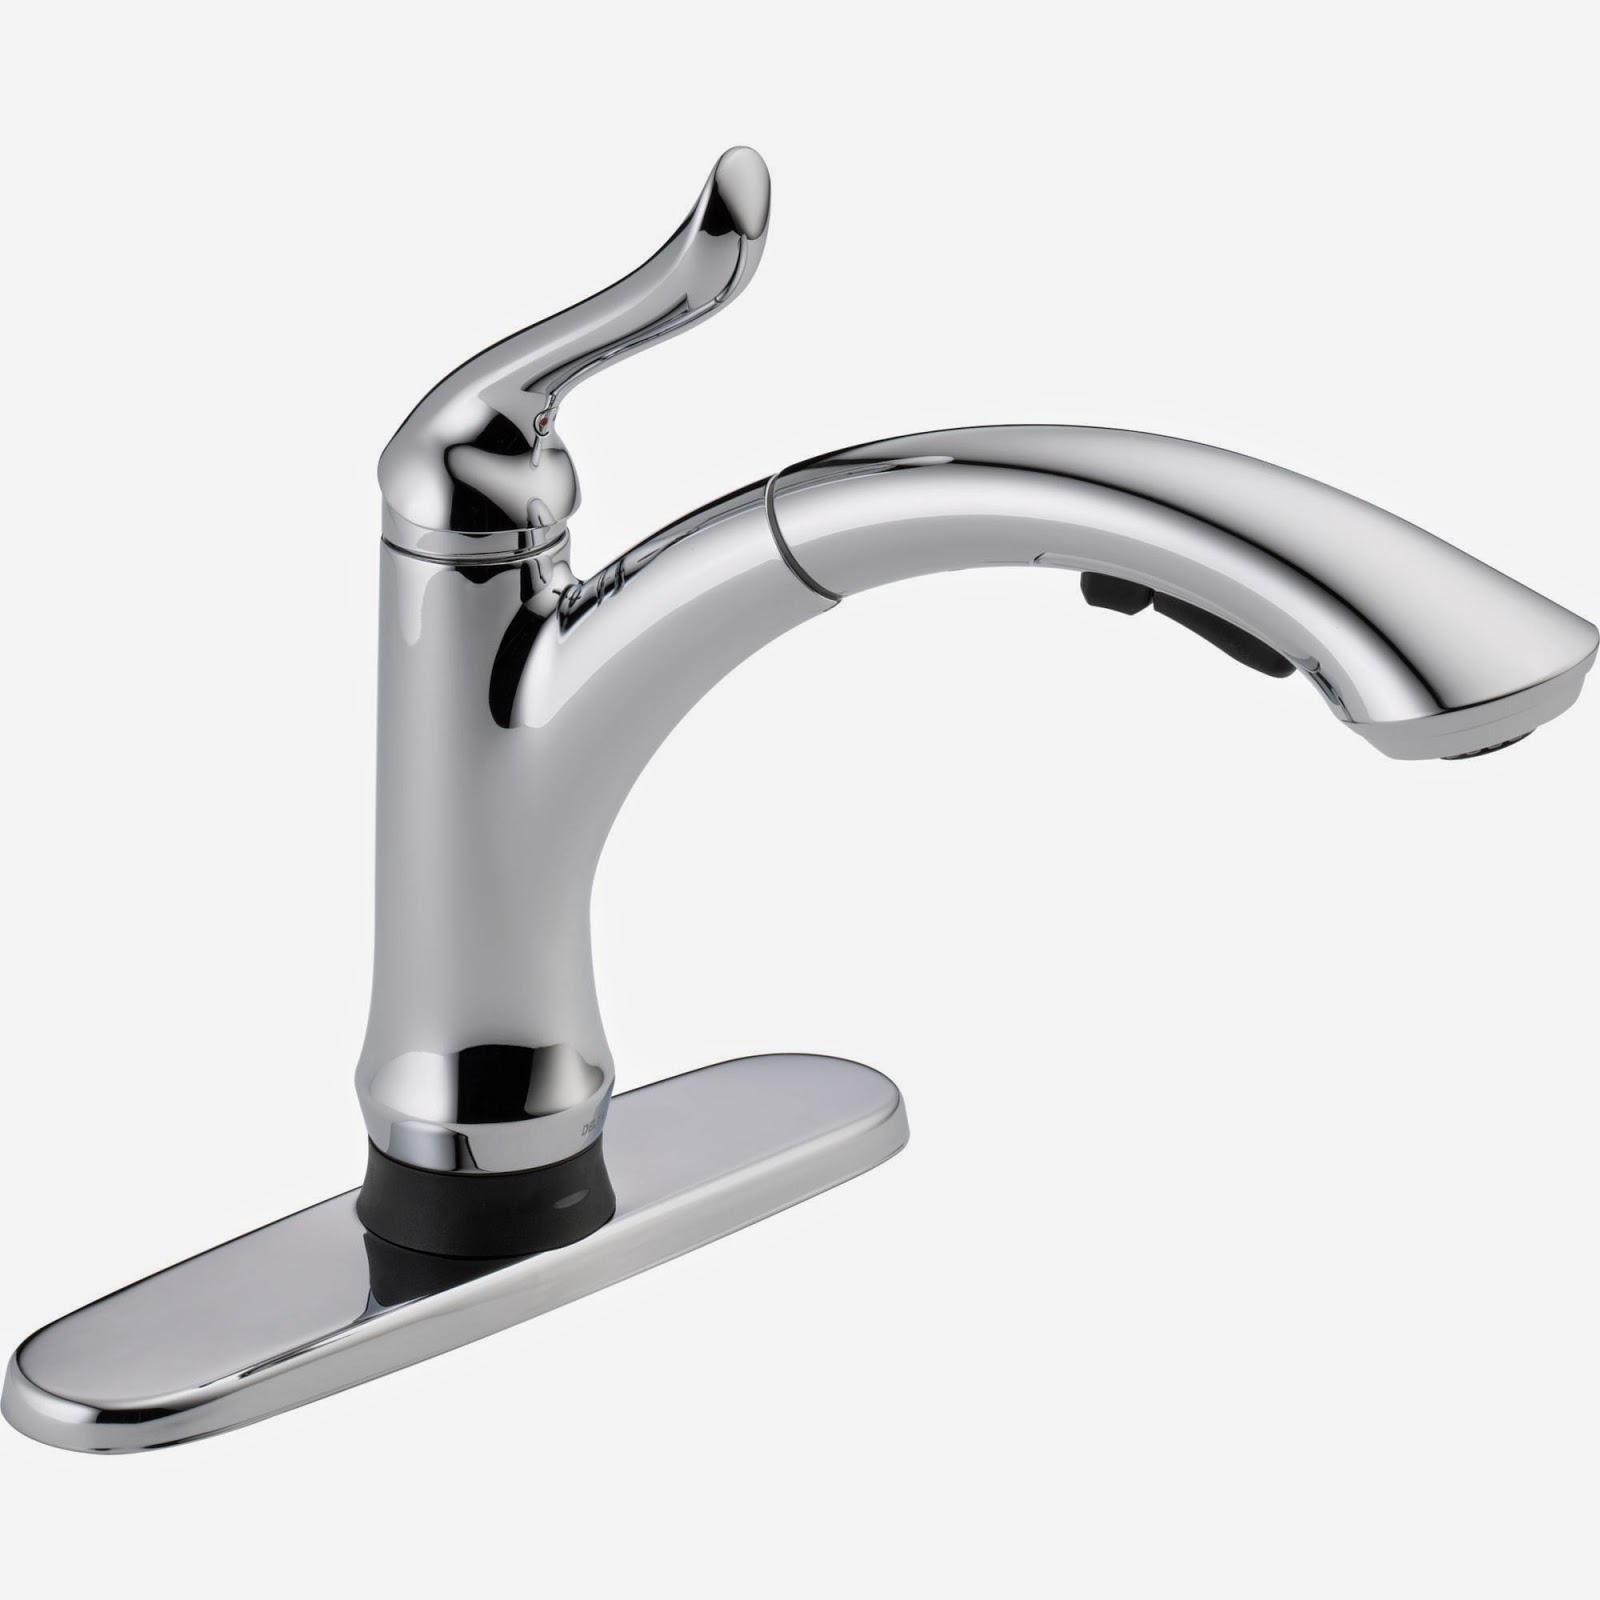 Kitchen Faucets for Accessibility - Universal Design for Accessible Homes